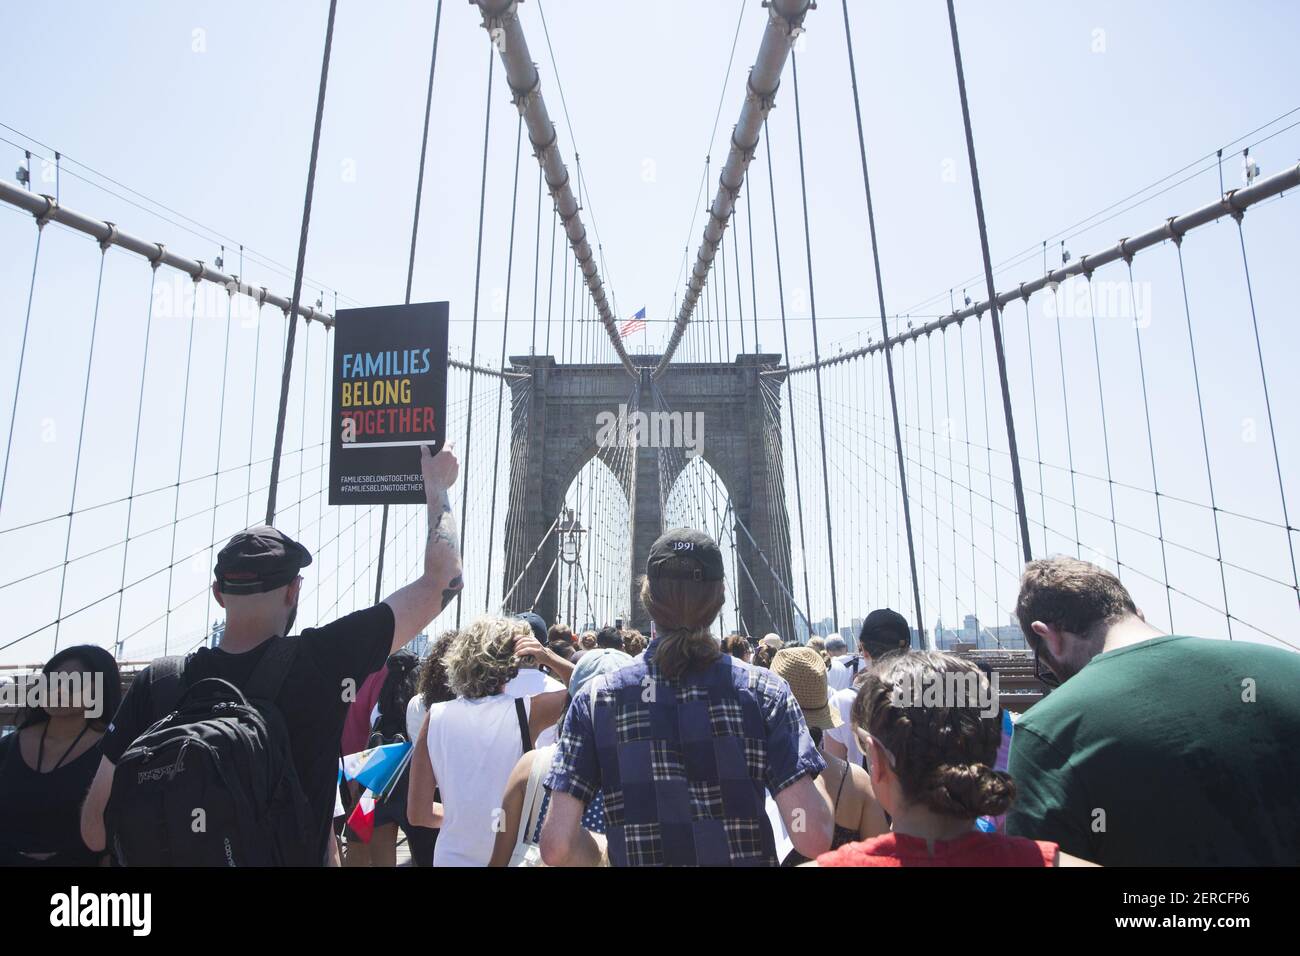 Protestors march across the Brooklyn Bridge during the march for National Day of Action: End Family Separation in New York, New York on June 30, 2018. Thousands of protestors marched from Foley Square over the Brooklyn Bridge to protest immigration raids across the country. (Photo by Erin Lefevre/Sipa USA) Stock Photo